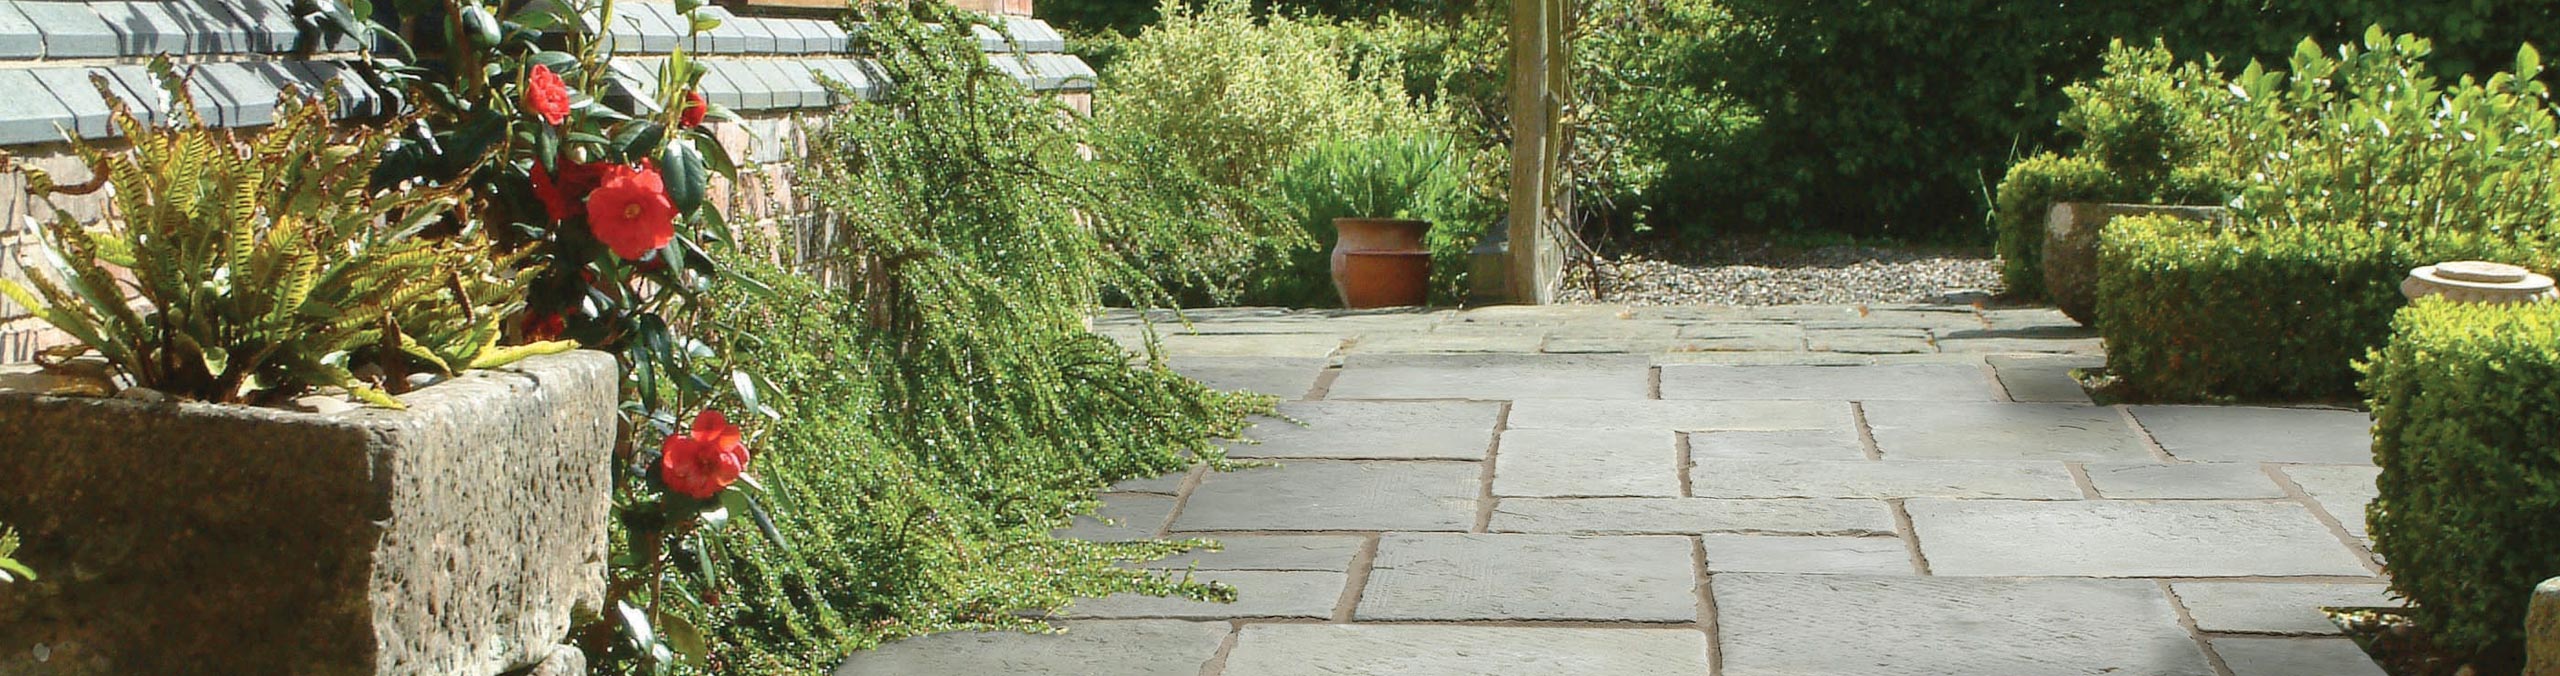 Over 500 Styles of Paving - the UK's biggest paving store